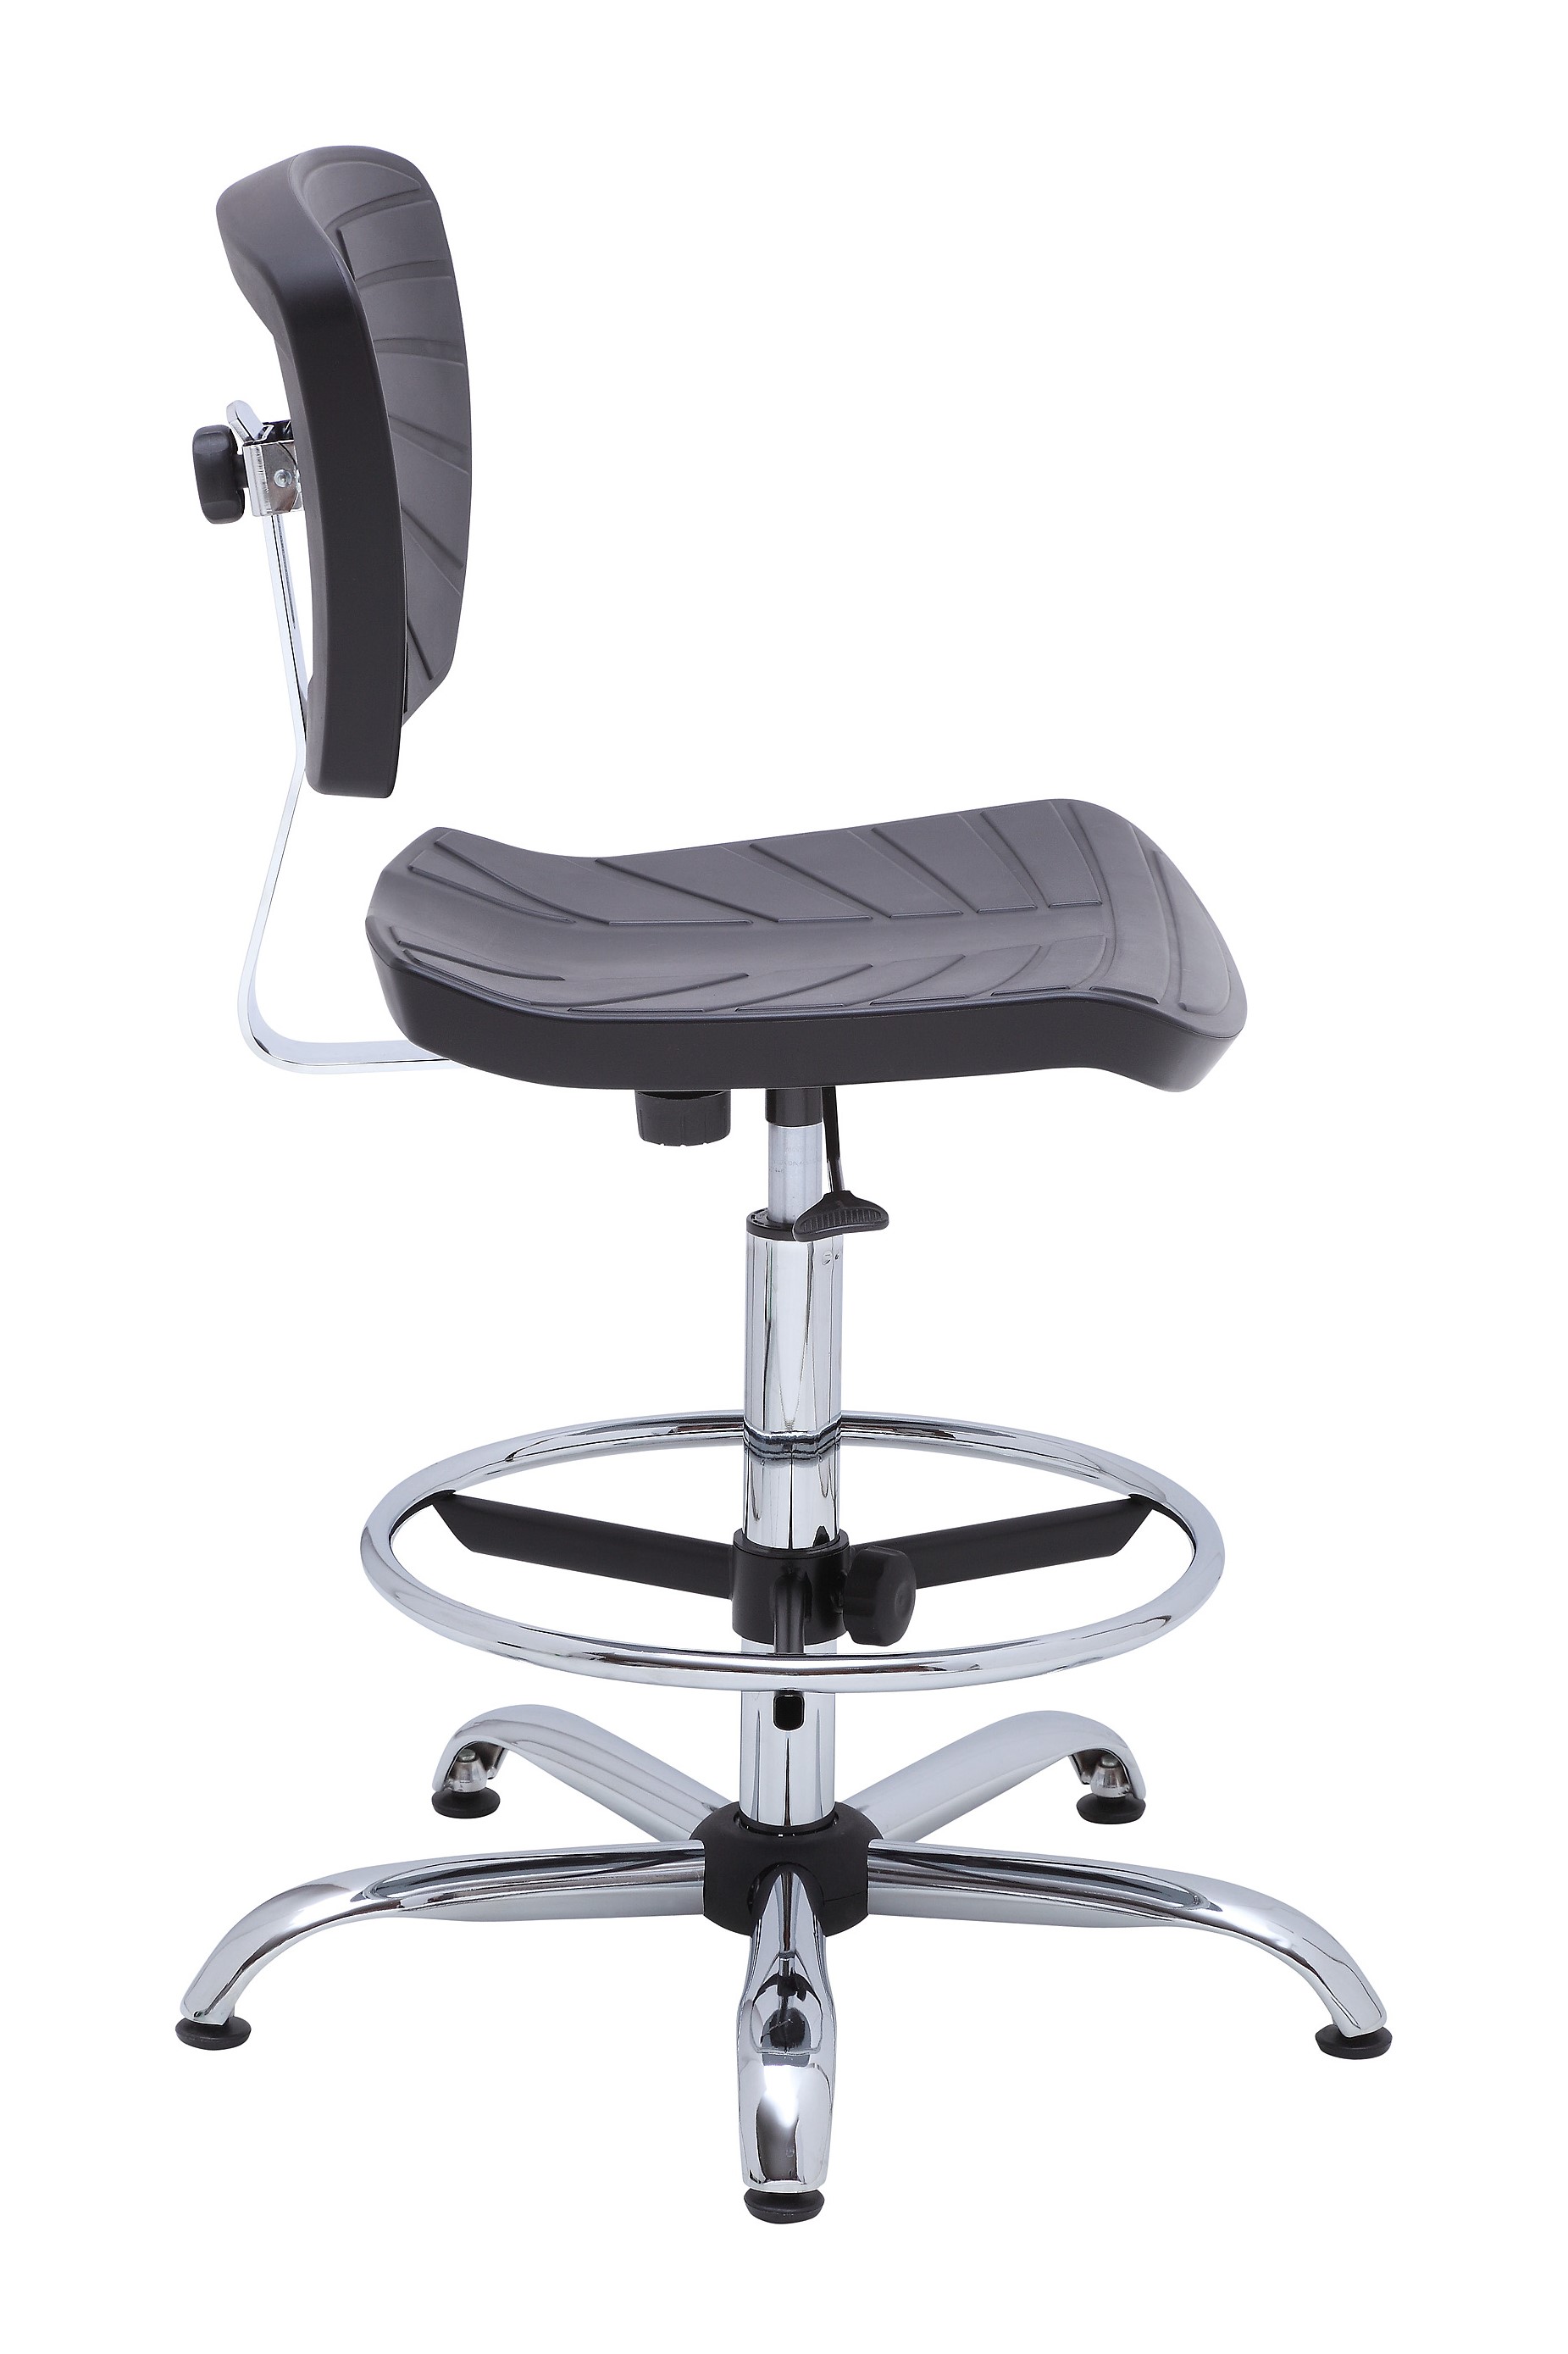 Ergowork ESD Swivel Chair with Glides ESD Chair GEMINI Special CHL Antistatic Chair ESD Products AES